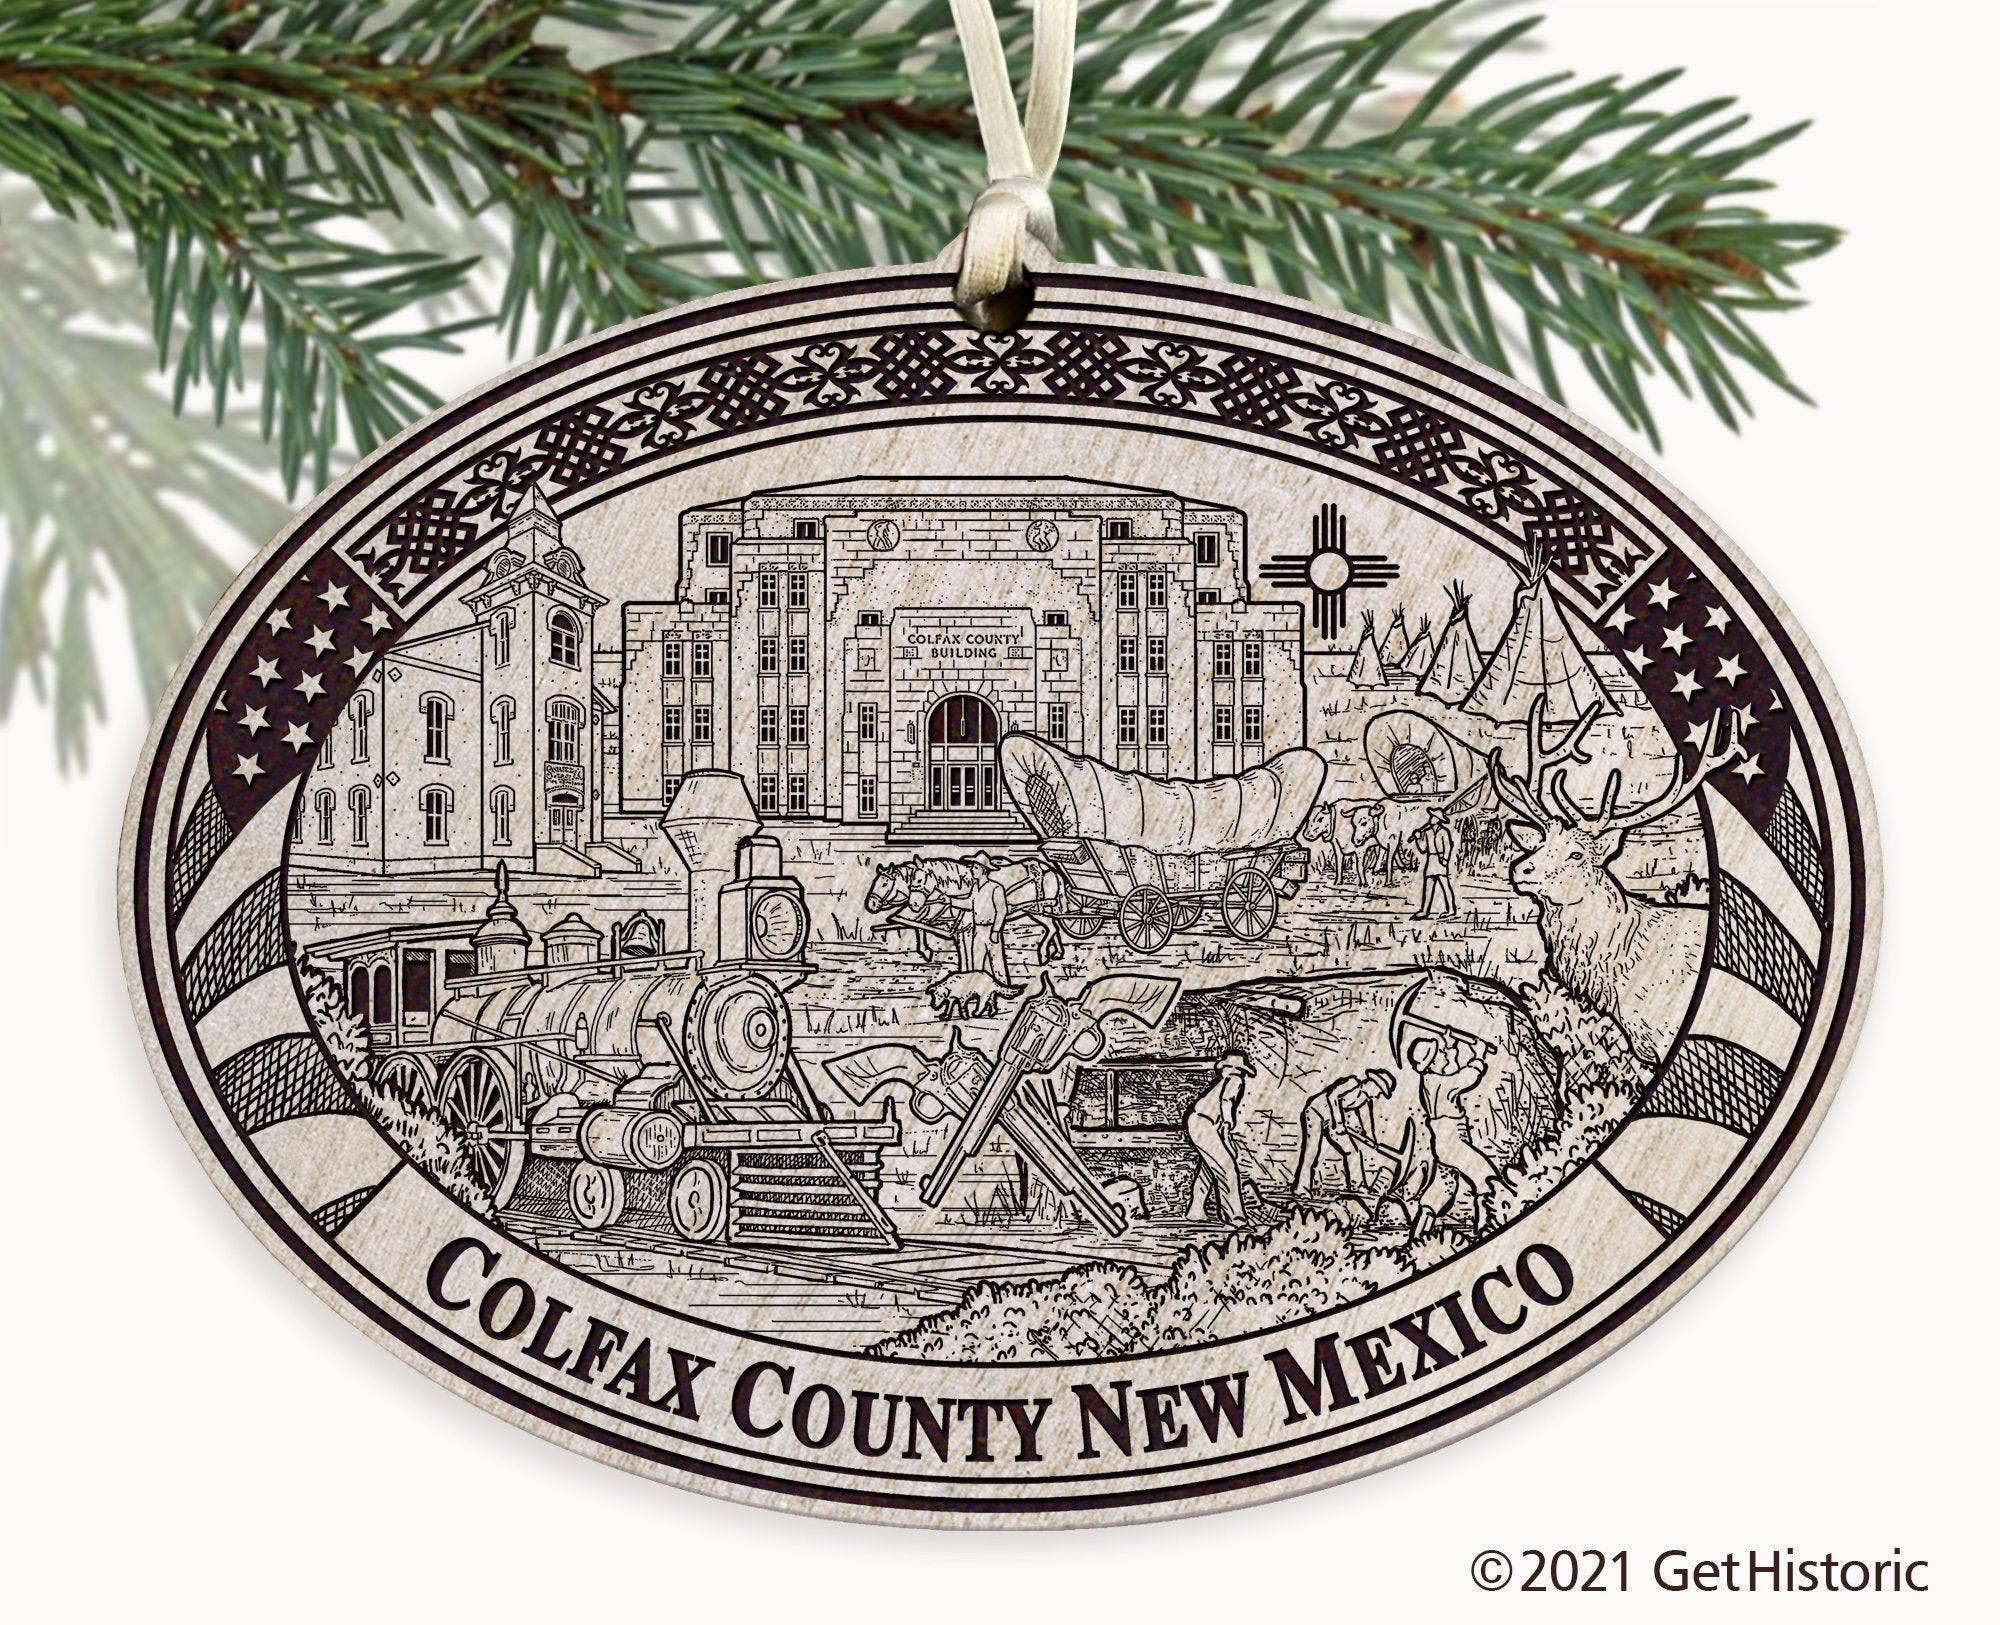 Colfax County New Mexico Engraved Ornament